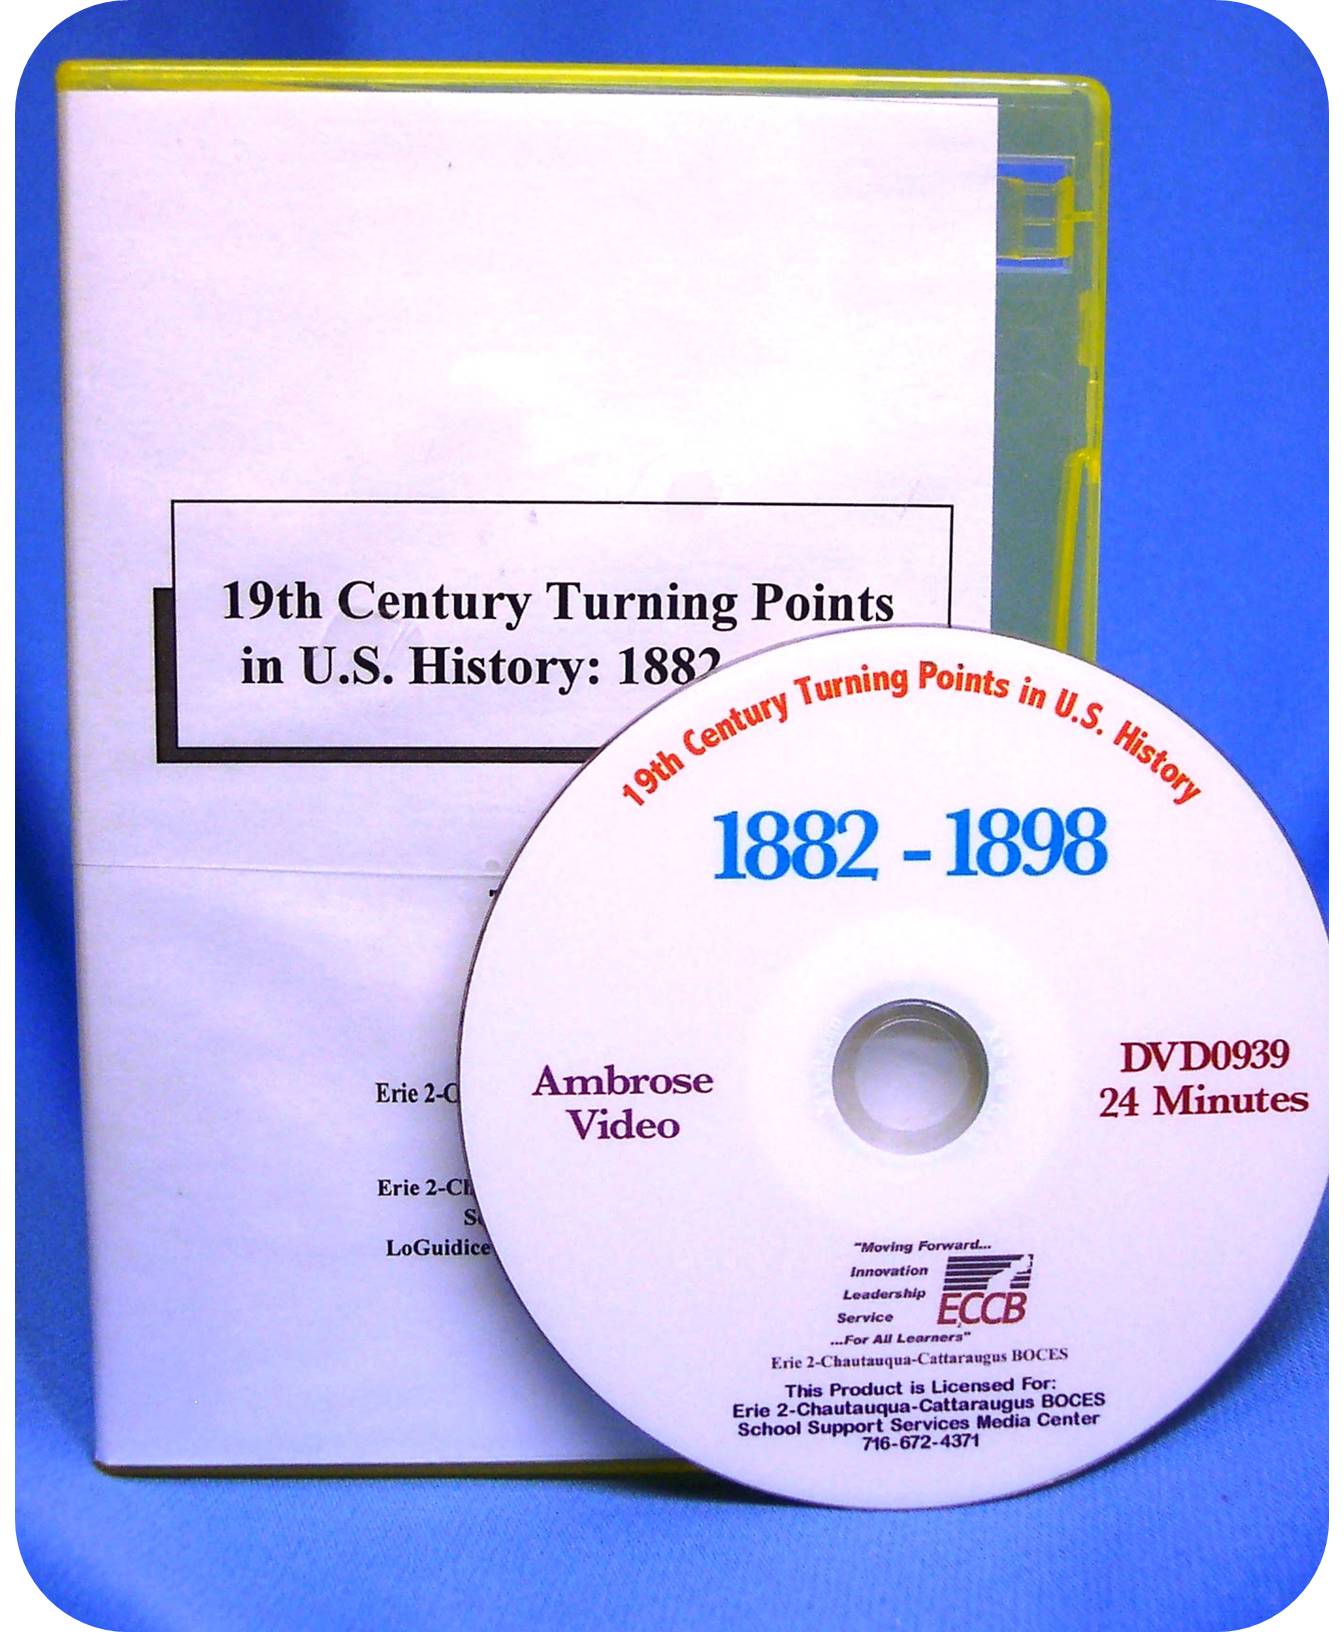 19th Century Turning Points in U.S. History: 1882 - 1898